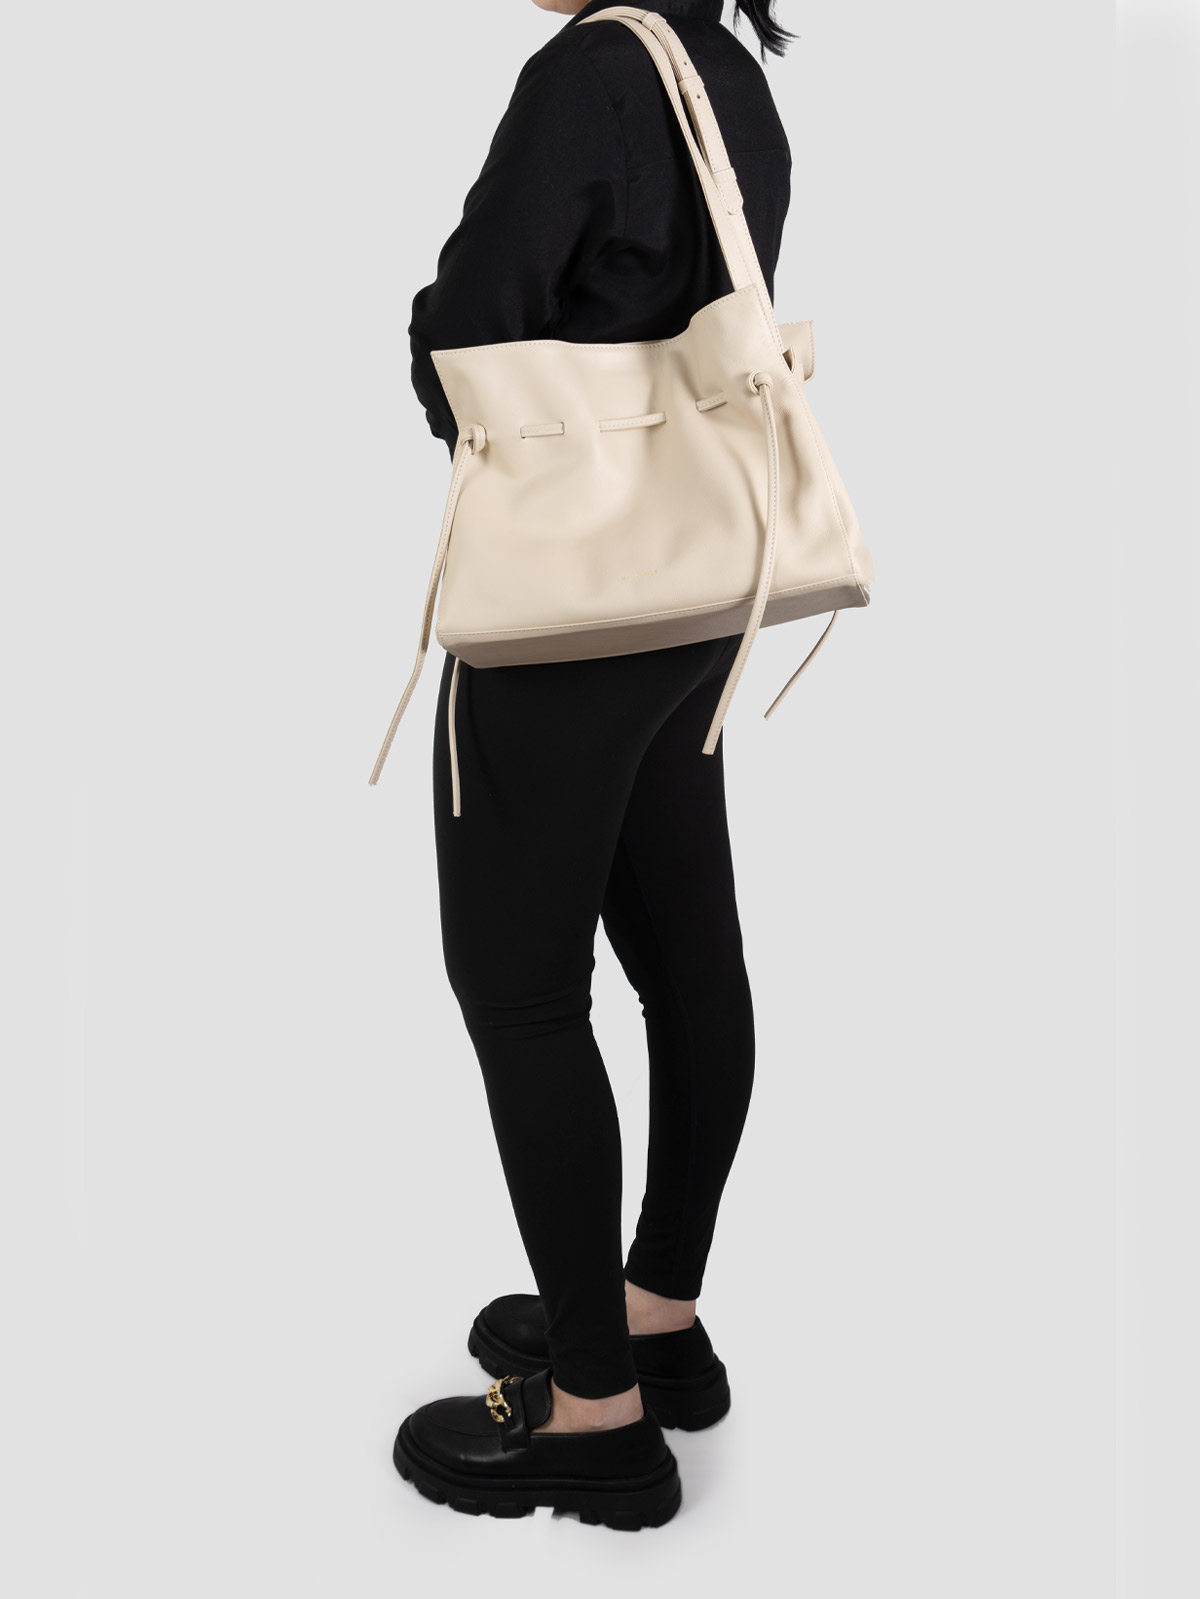 marroque wendy-tote-ivorywhite leather bag.